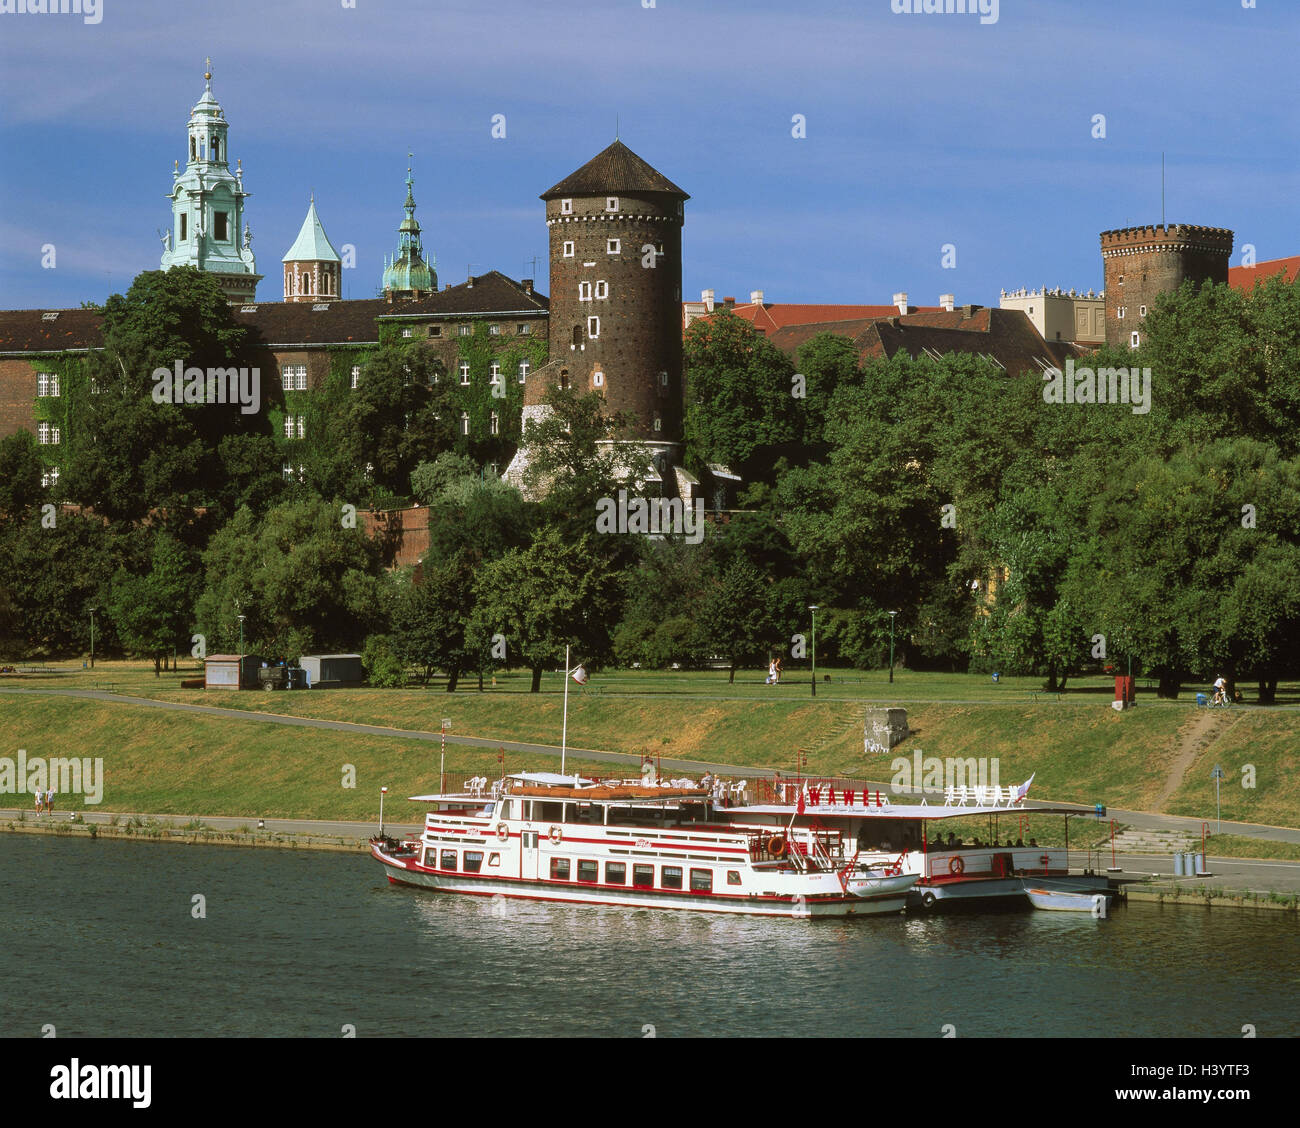 Poland, Cracow, Wawel, lock, church, morello, excursion boat, East, Europe, castle mountain, Wawel hill, royal castle, cathedral, river, Wisla, place of interest, culture, tourism, destination, summer, Stock Photo